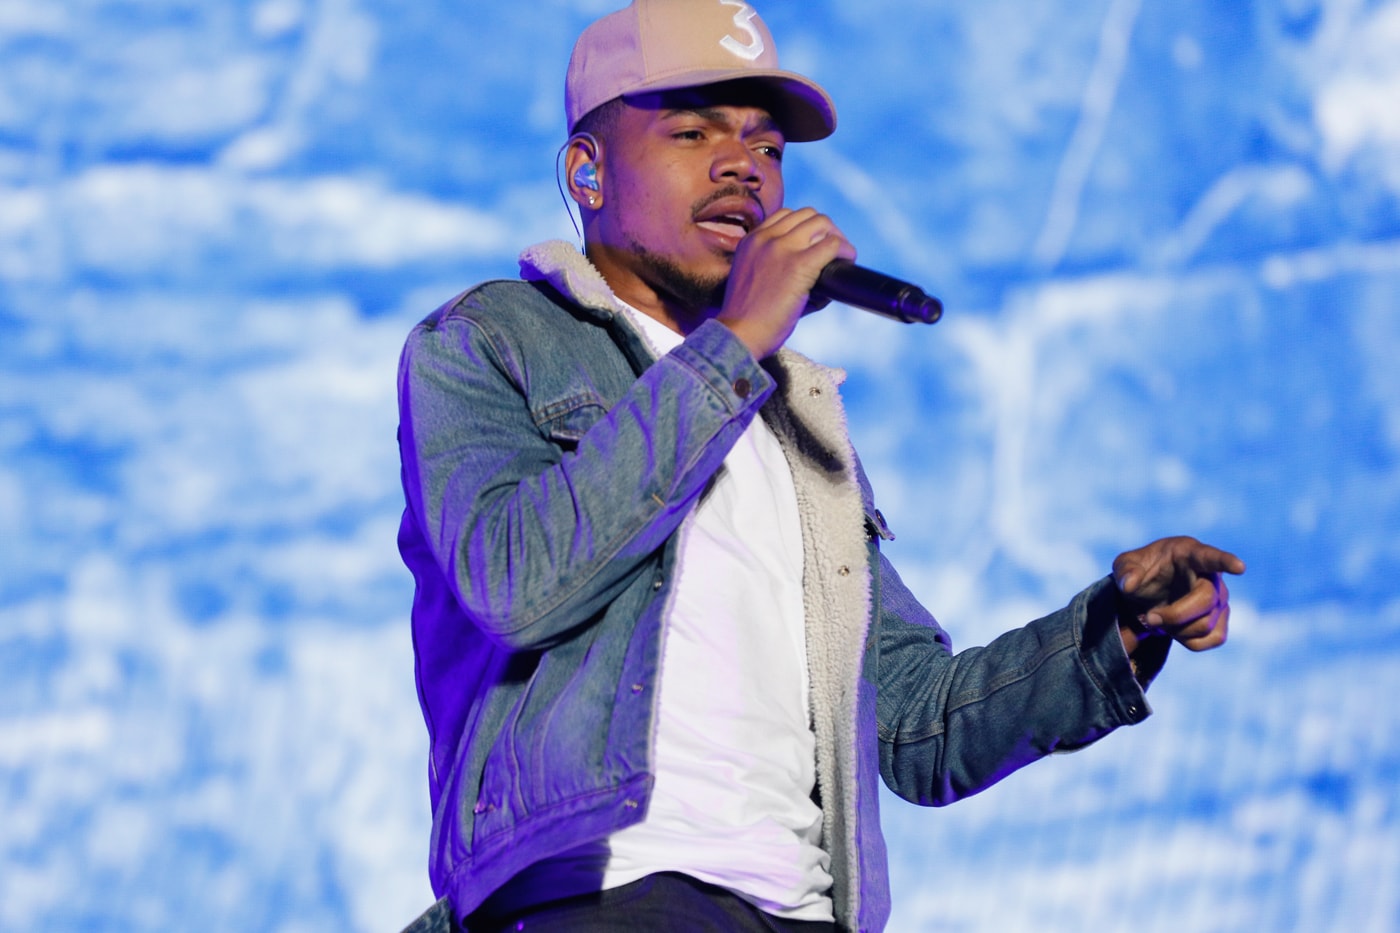 chance-the-rapper-teams-up-with-skrillex-in-the-show-me-love-remix-video